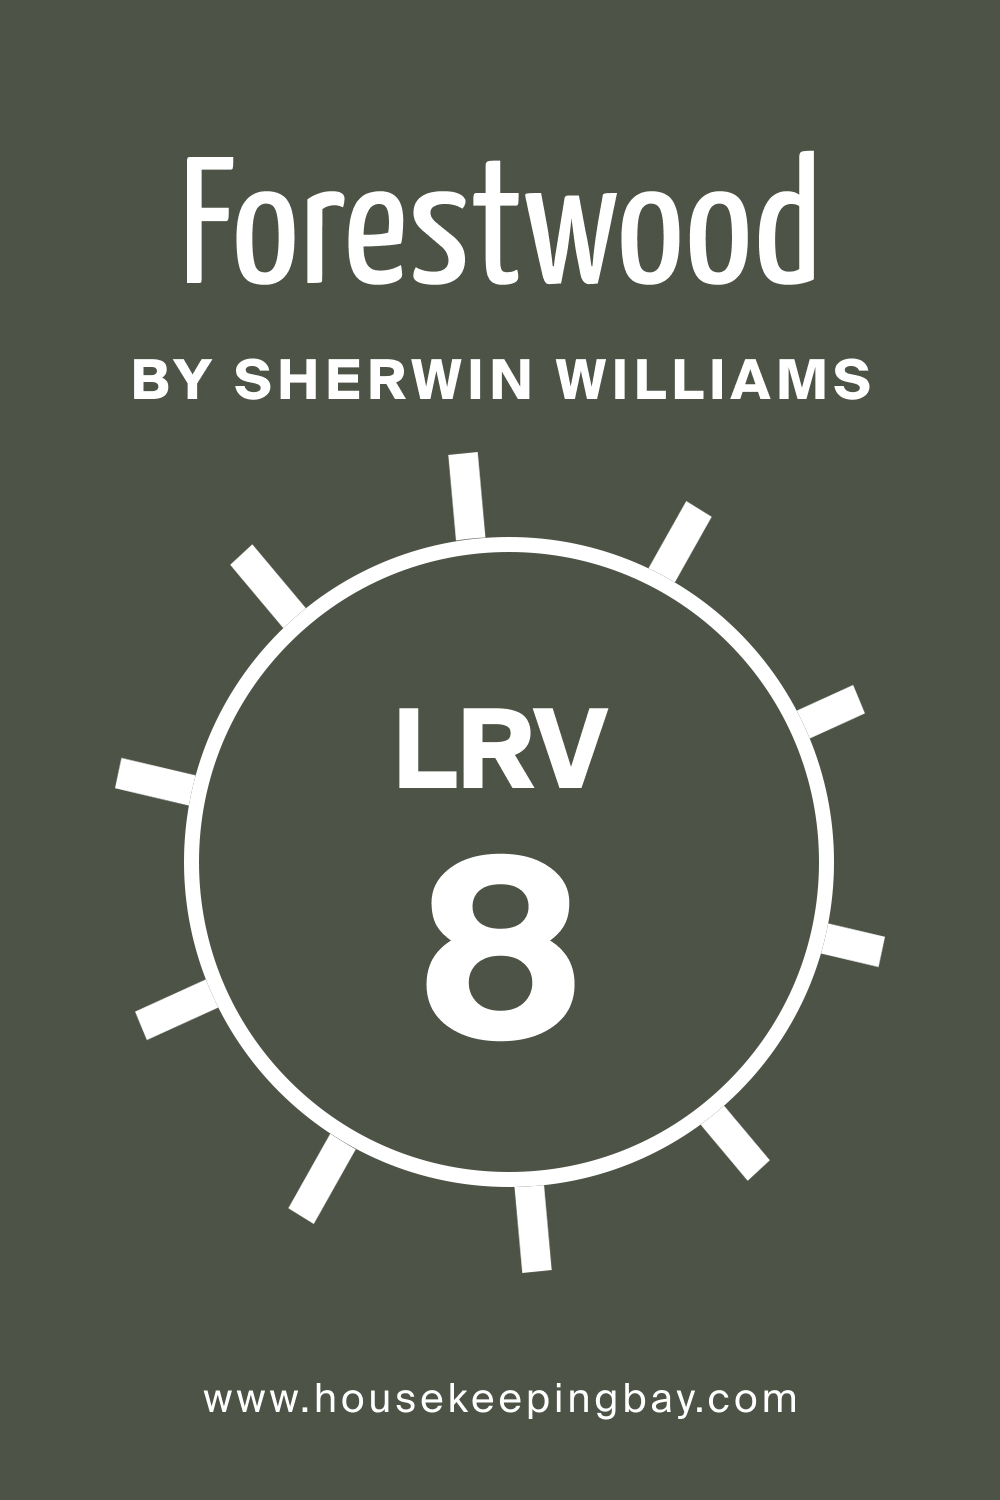 SW 7730 Forestwood by Sherwin Williams. LRV 8